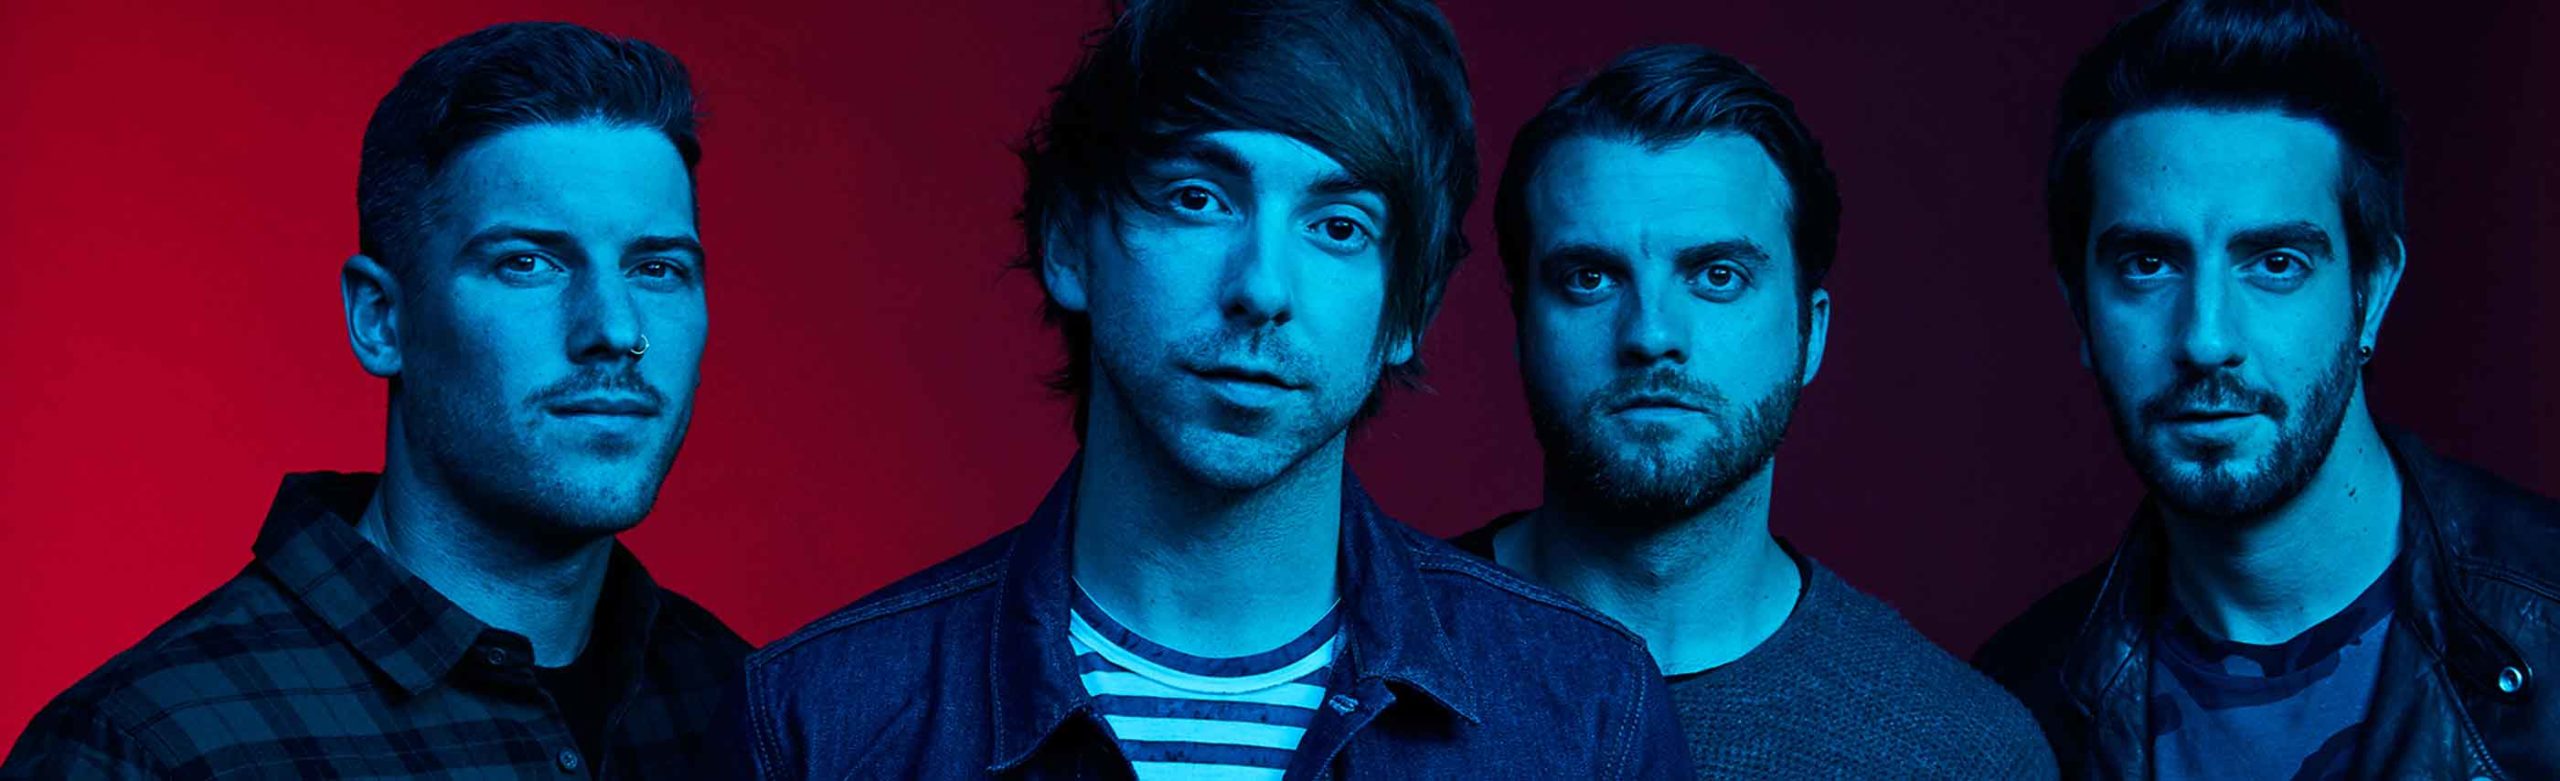 GIVEAWAY: All Time Low Tickets + Autographed Merchandise Image